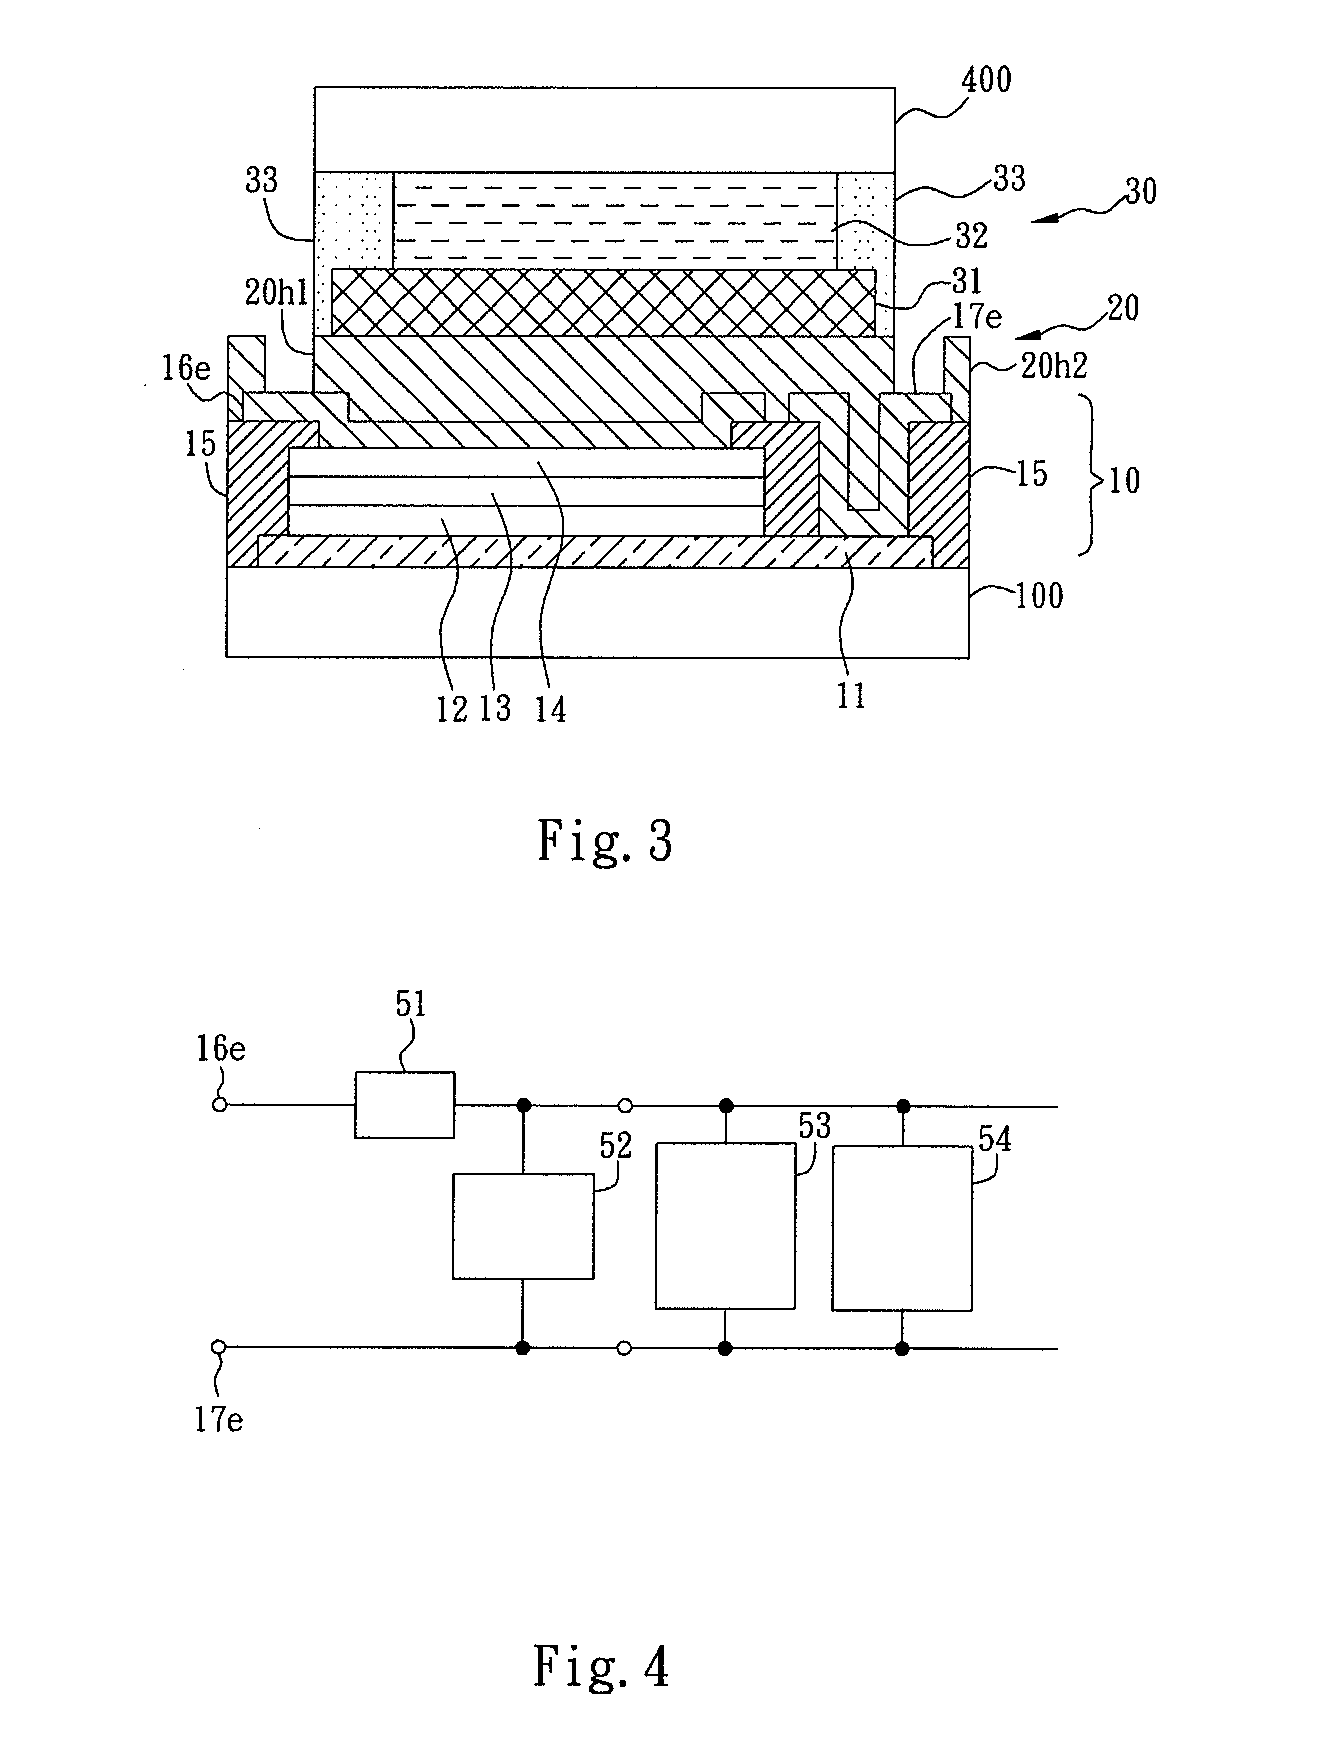 Liquid crystal display device equipped with a photovoltaic conversion function